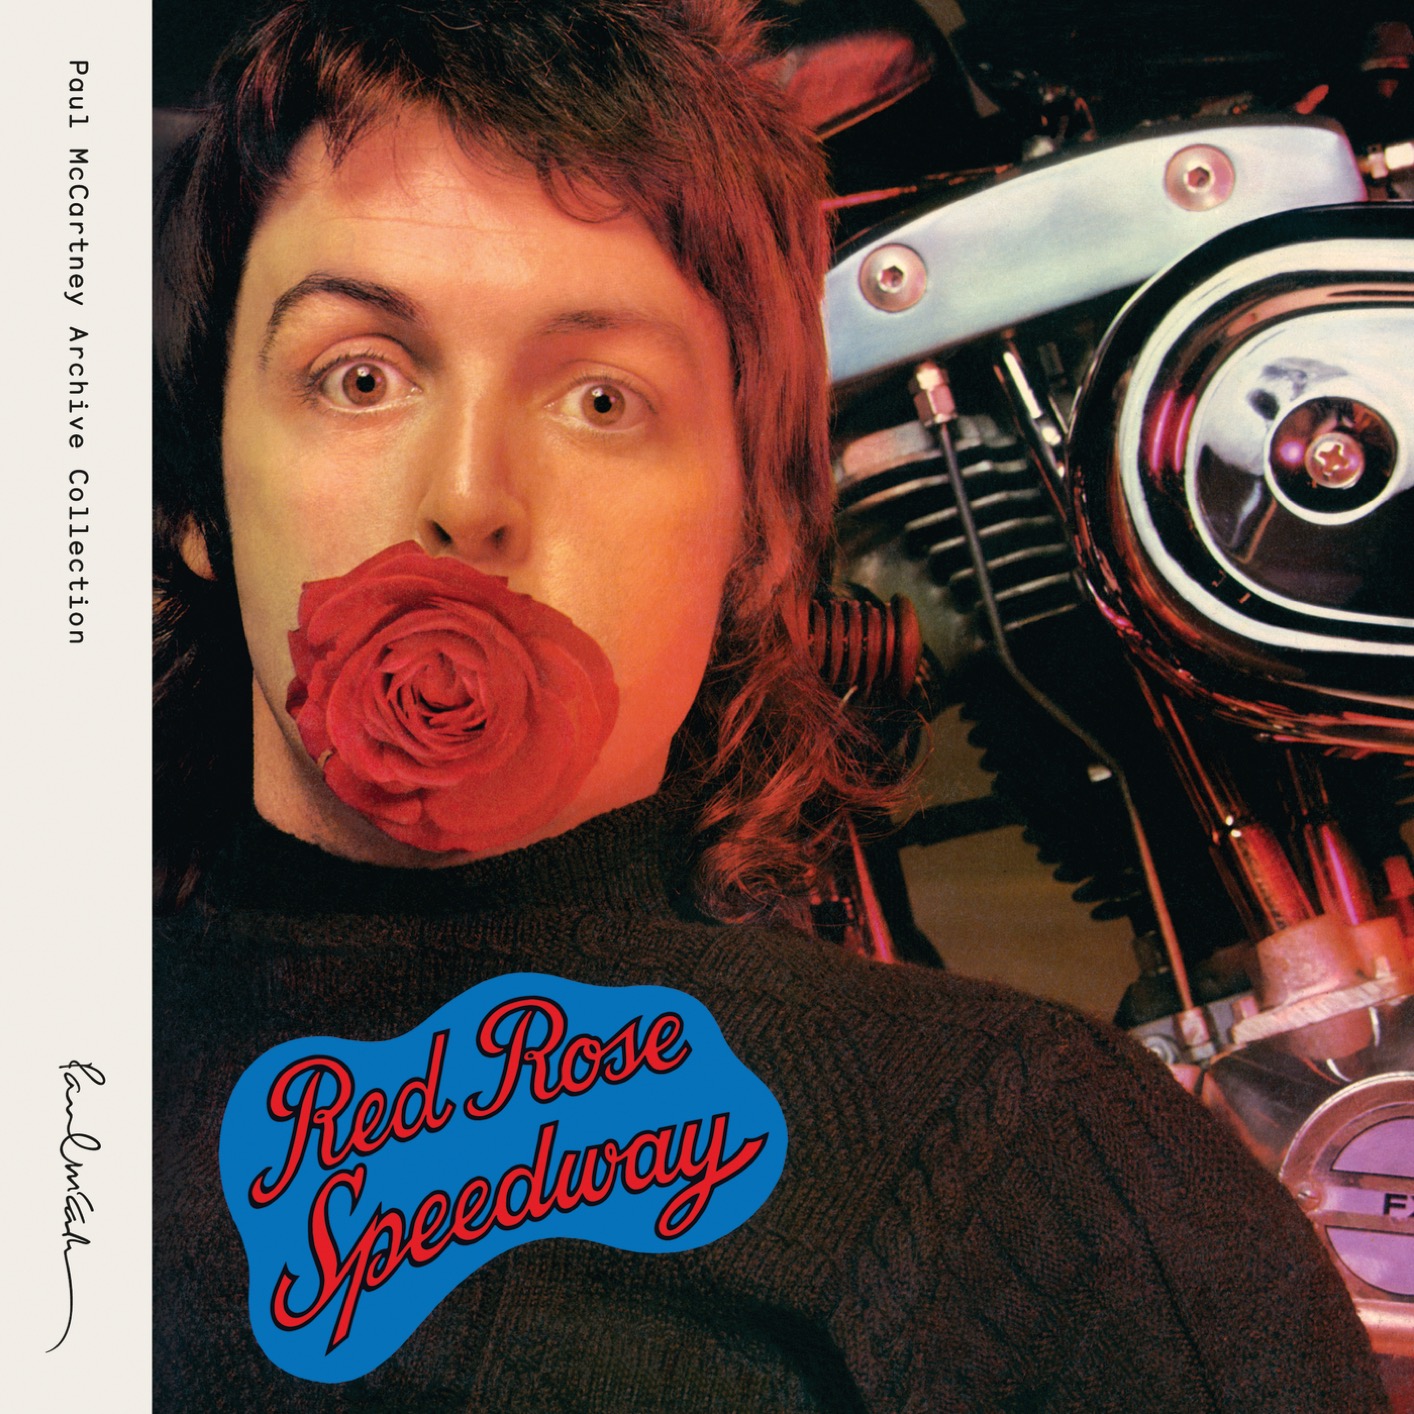 Paul McCartney & Wings - Red Rose Speedway (Special Edition) (1973/2018) [FLAC 24bit/96kHz]